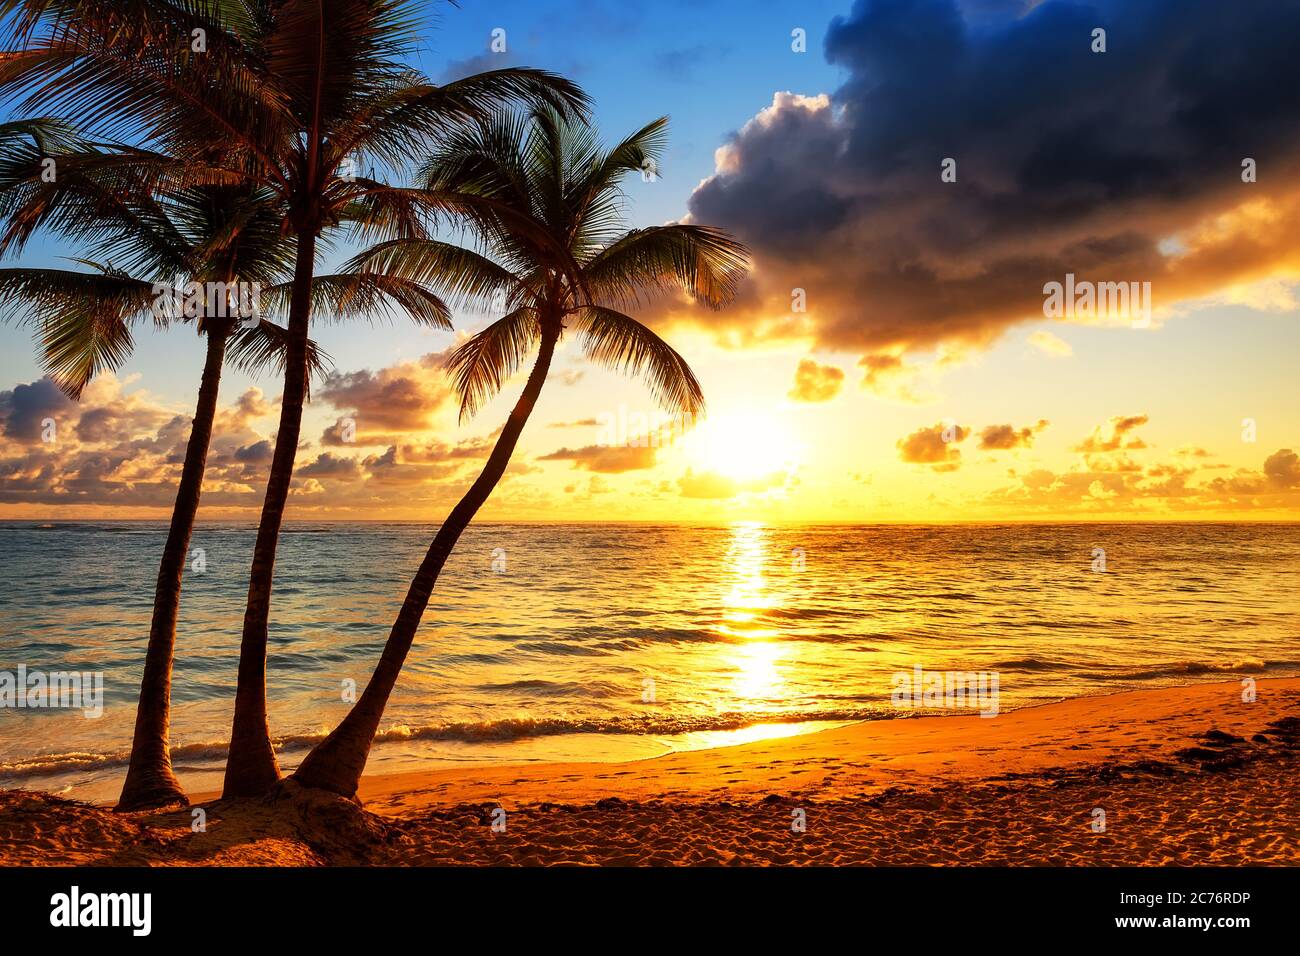 Coconut palm trees against colorful sunset Stock Photo